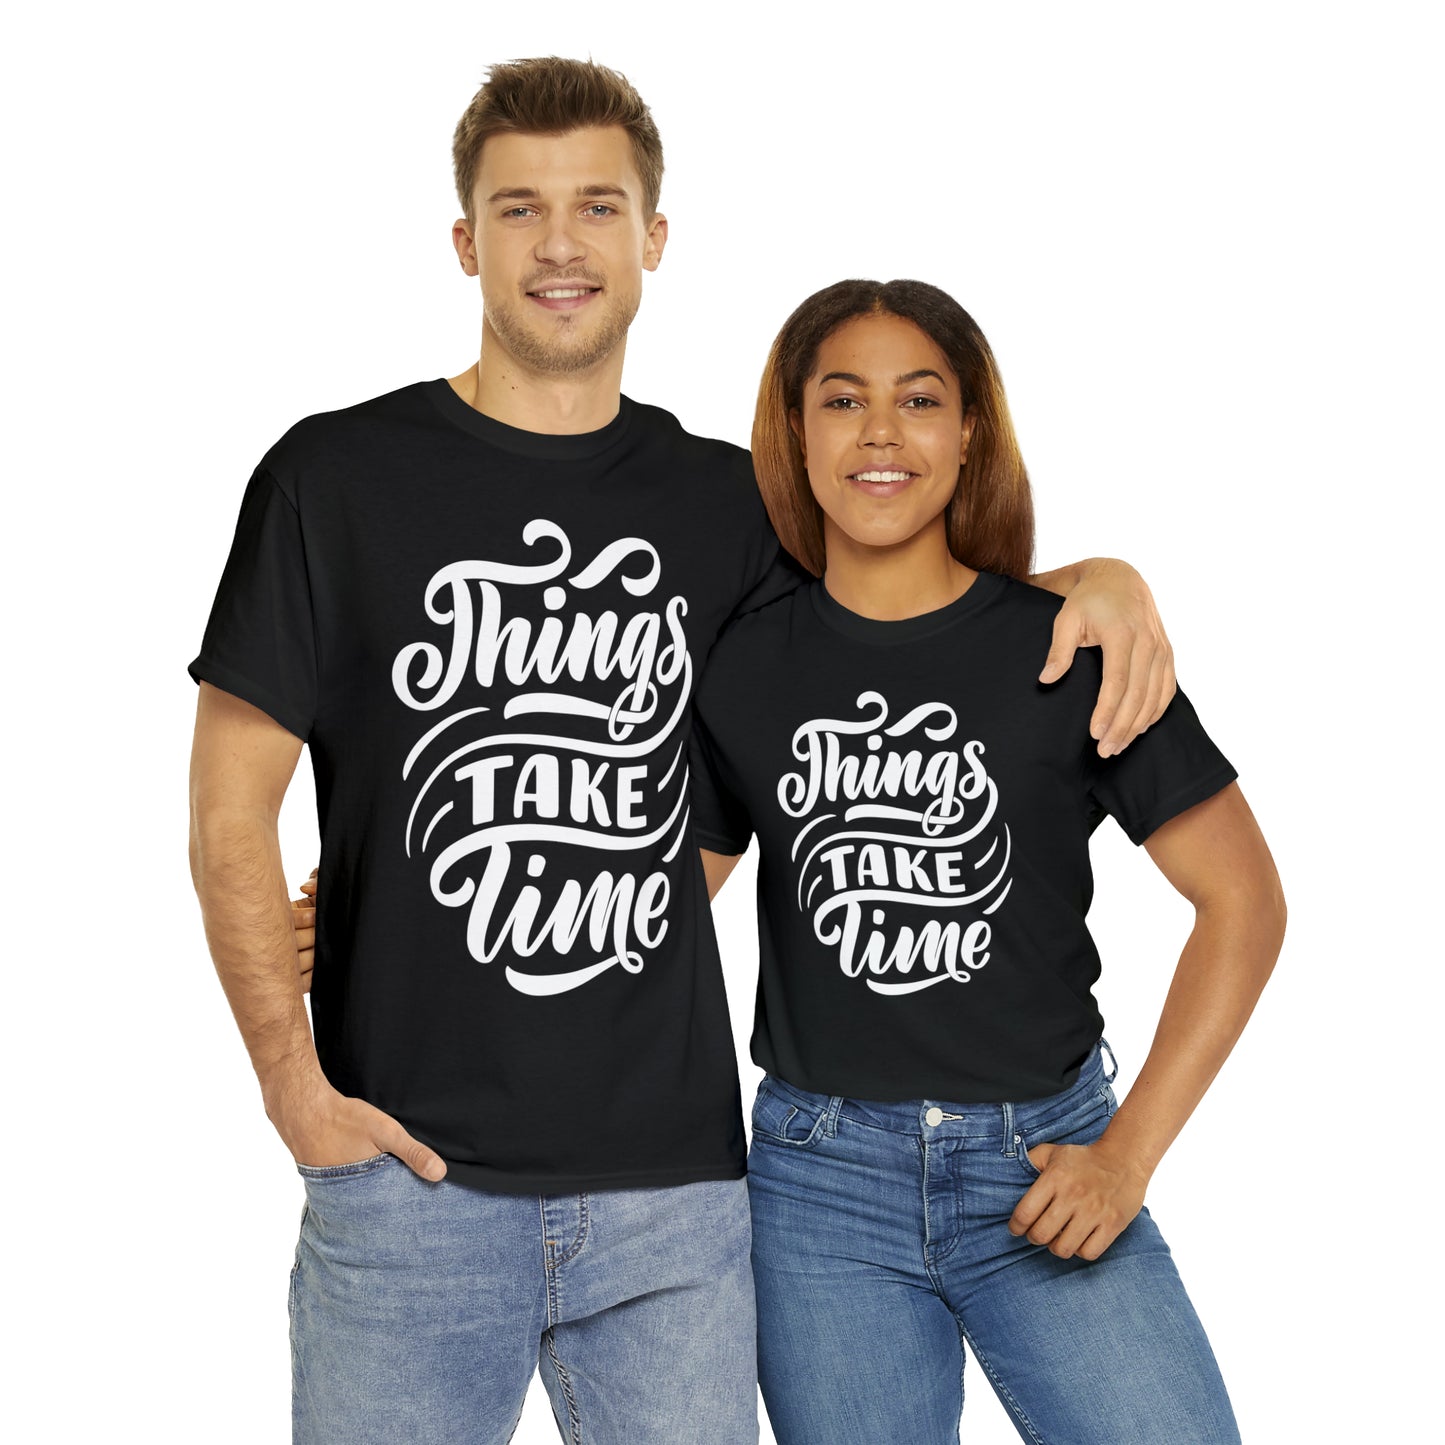 Introducing the "Things Takes Time" Motivational T-Shirt!